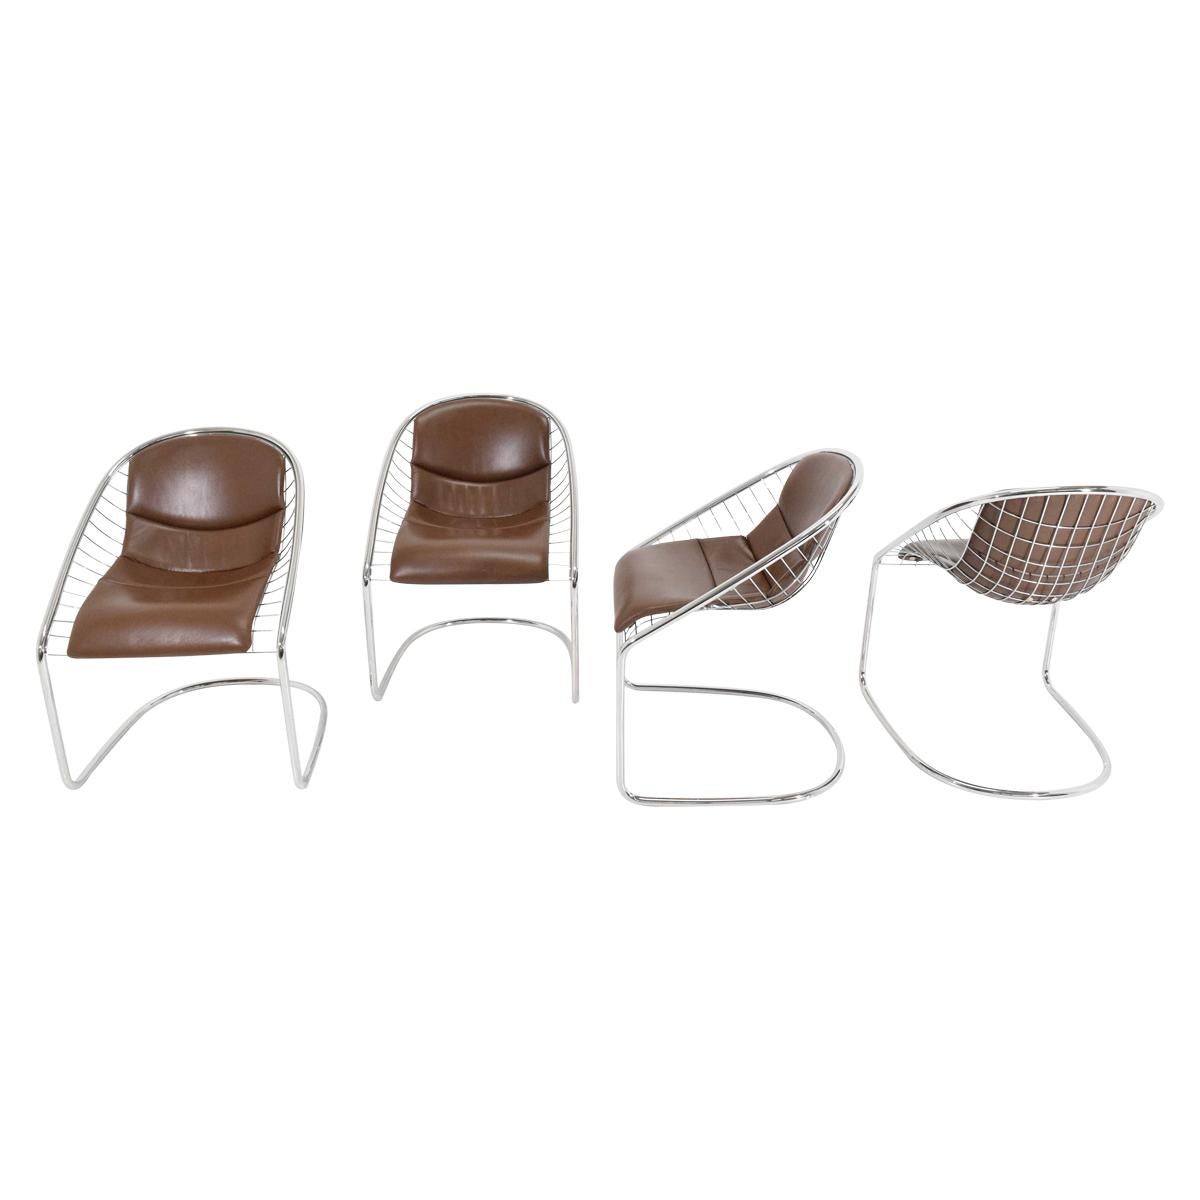 Minotti Chairs in Brown Leather by Gordon Guillaumier Cortina